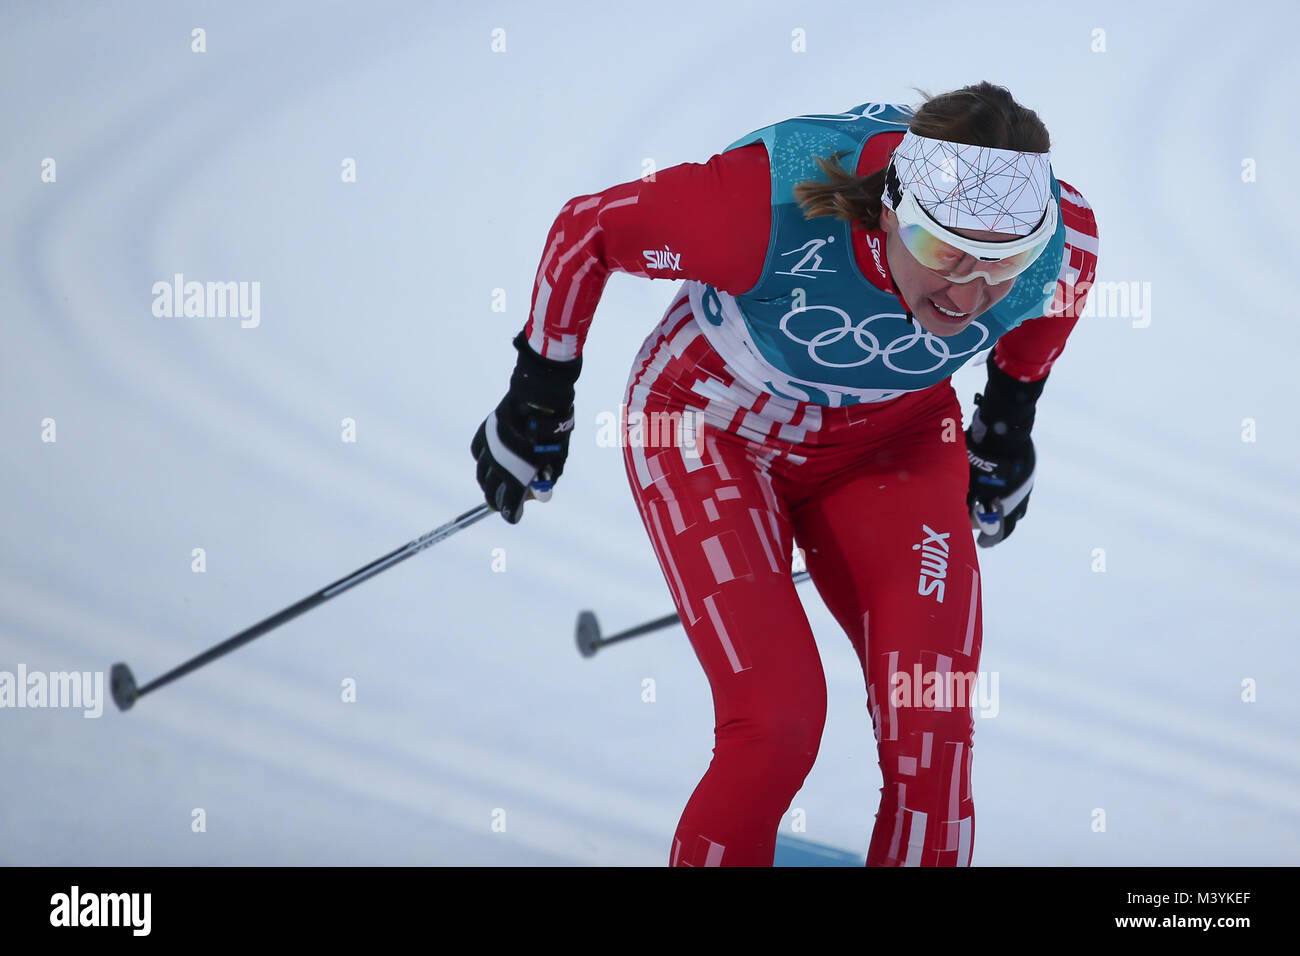 PyeongChang, South Korea. 13th Febraury, 2018. JUSTYNA KOWALCZYK   during the PyeongChang 2018 Olympic Games on February 13, 2018 in PyeongChang, South Korea Credit: East News sp. z o.o./Alamy Live News Stock Photo